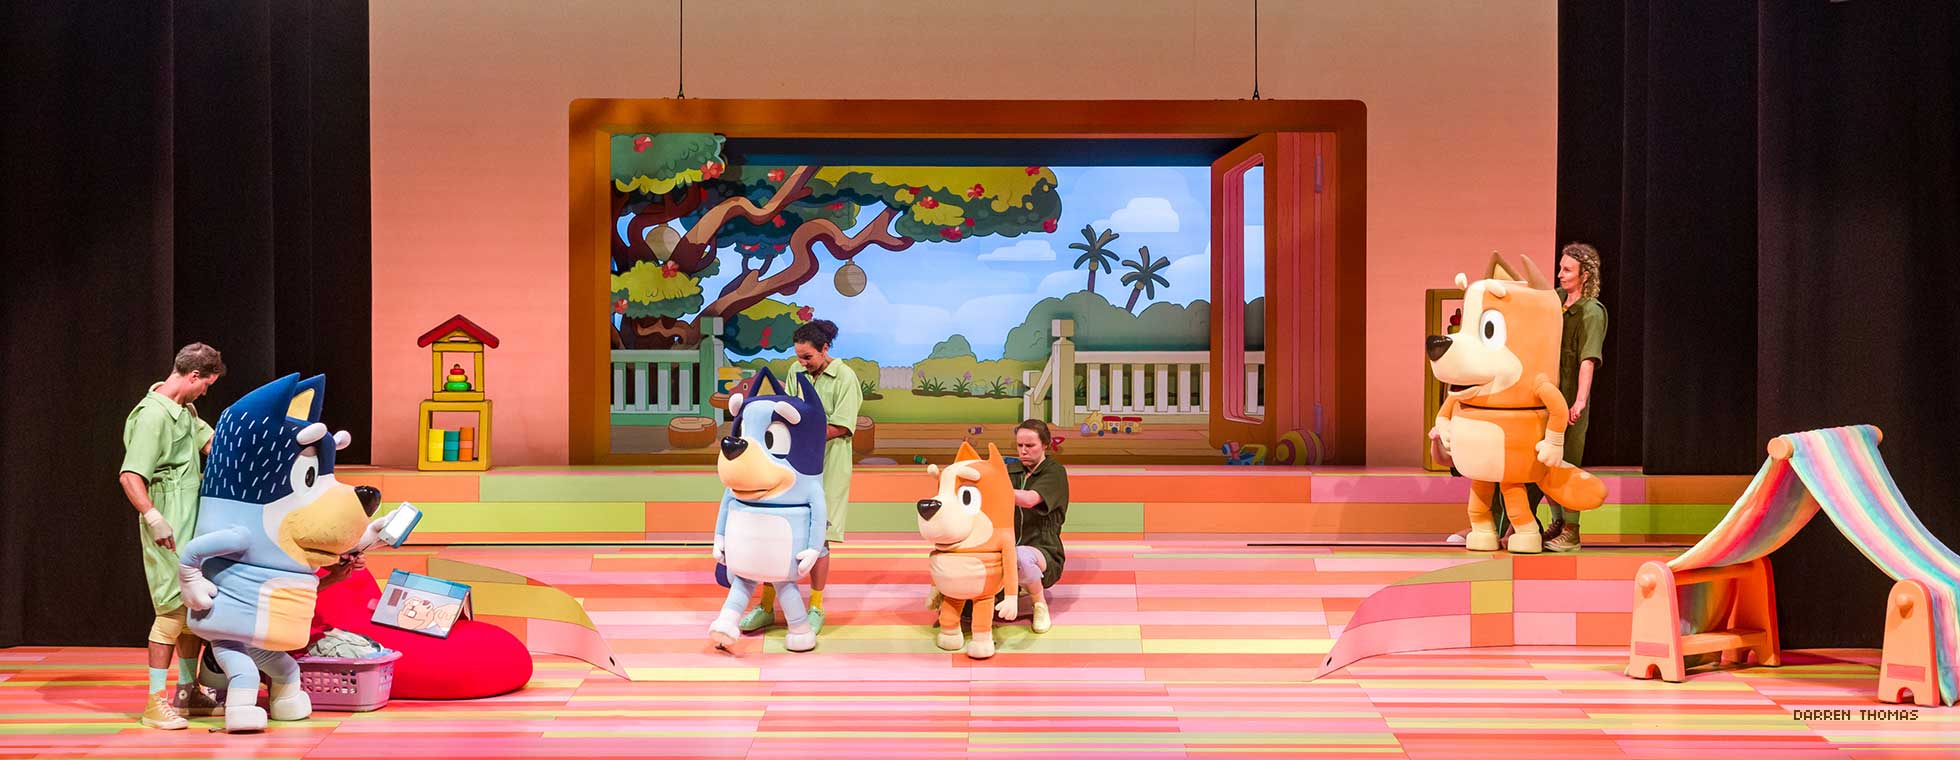 Live actors control the movements of four adult-sized dog puppets in a scene inside the family’s house. 